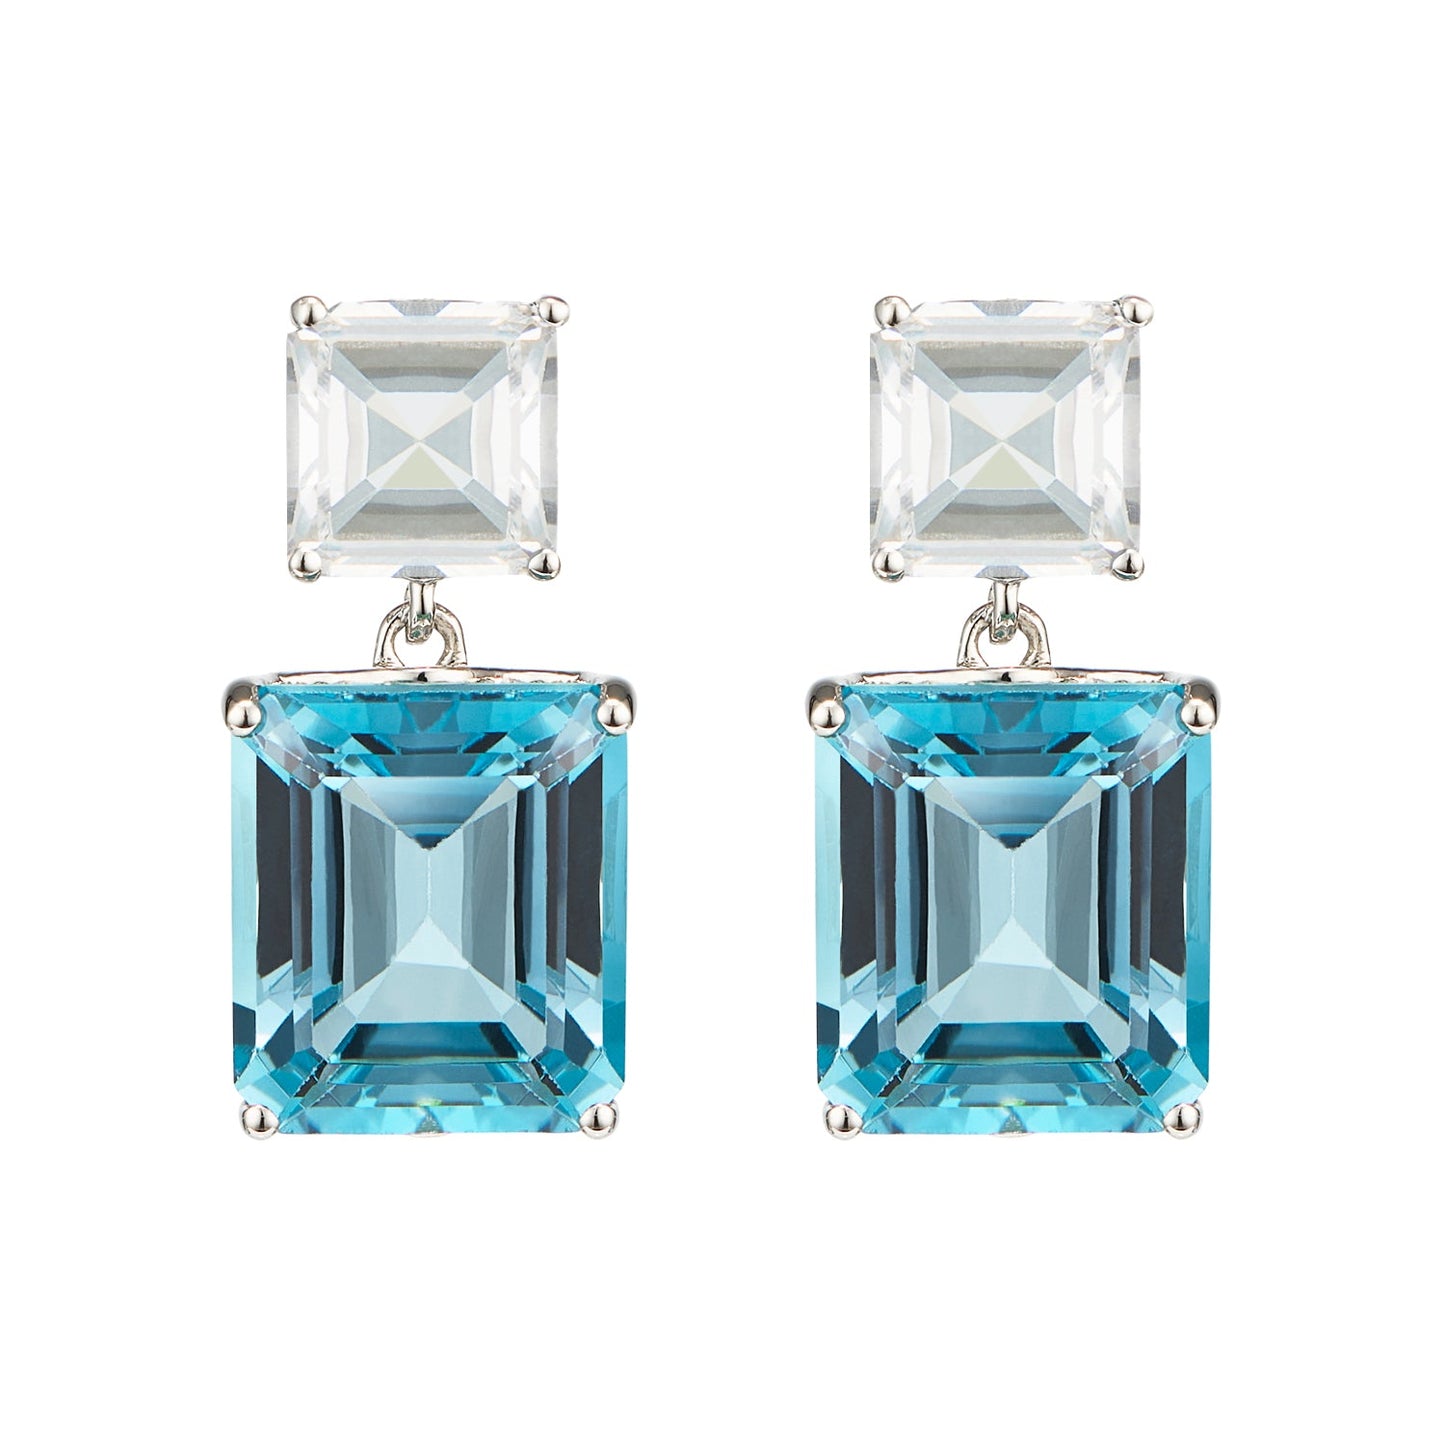 London-made luxury custom gold gemstone jewellery - Octagon White Gold Drop Earrings in White Topaz & Blue Topaz – Andalusian Collection, Augustine Jewellery, British Jewellers, Gemstone Jewellery, Luxury Jewellery London.